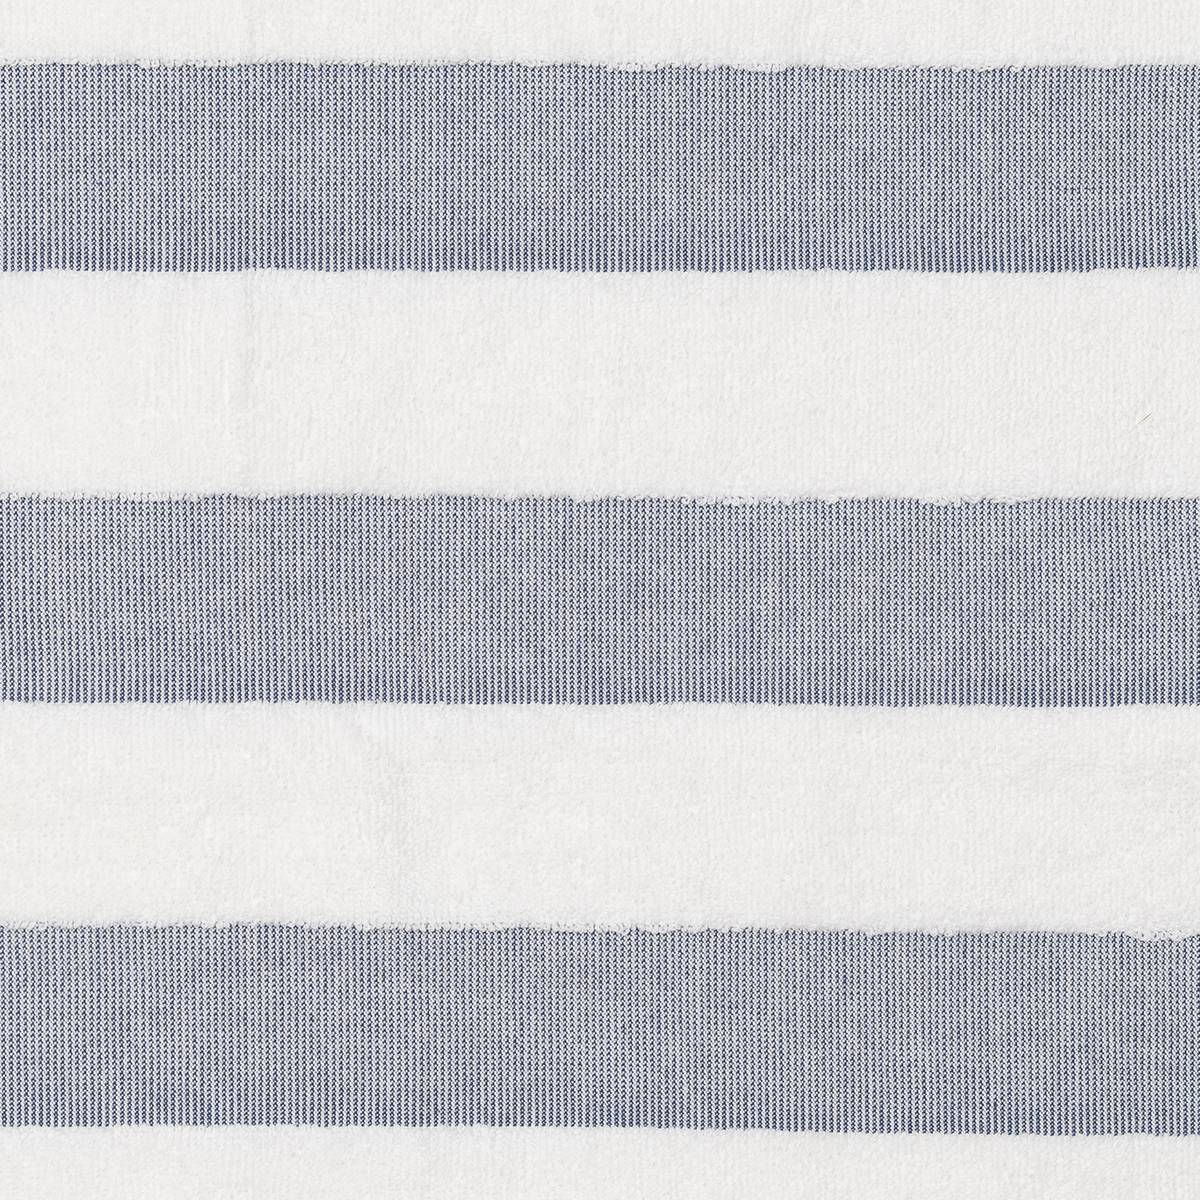 Swatch Sample of Matouk Amado Pool and Beach Towels in Navy Color